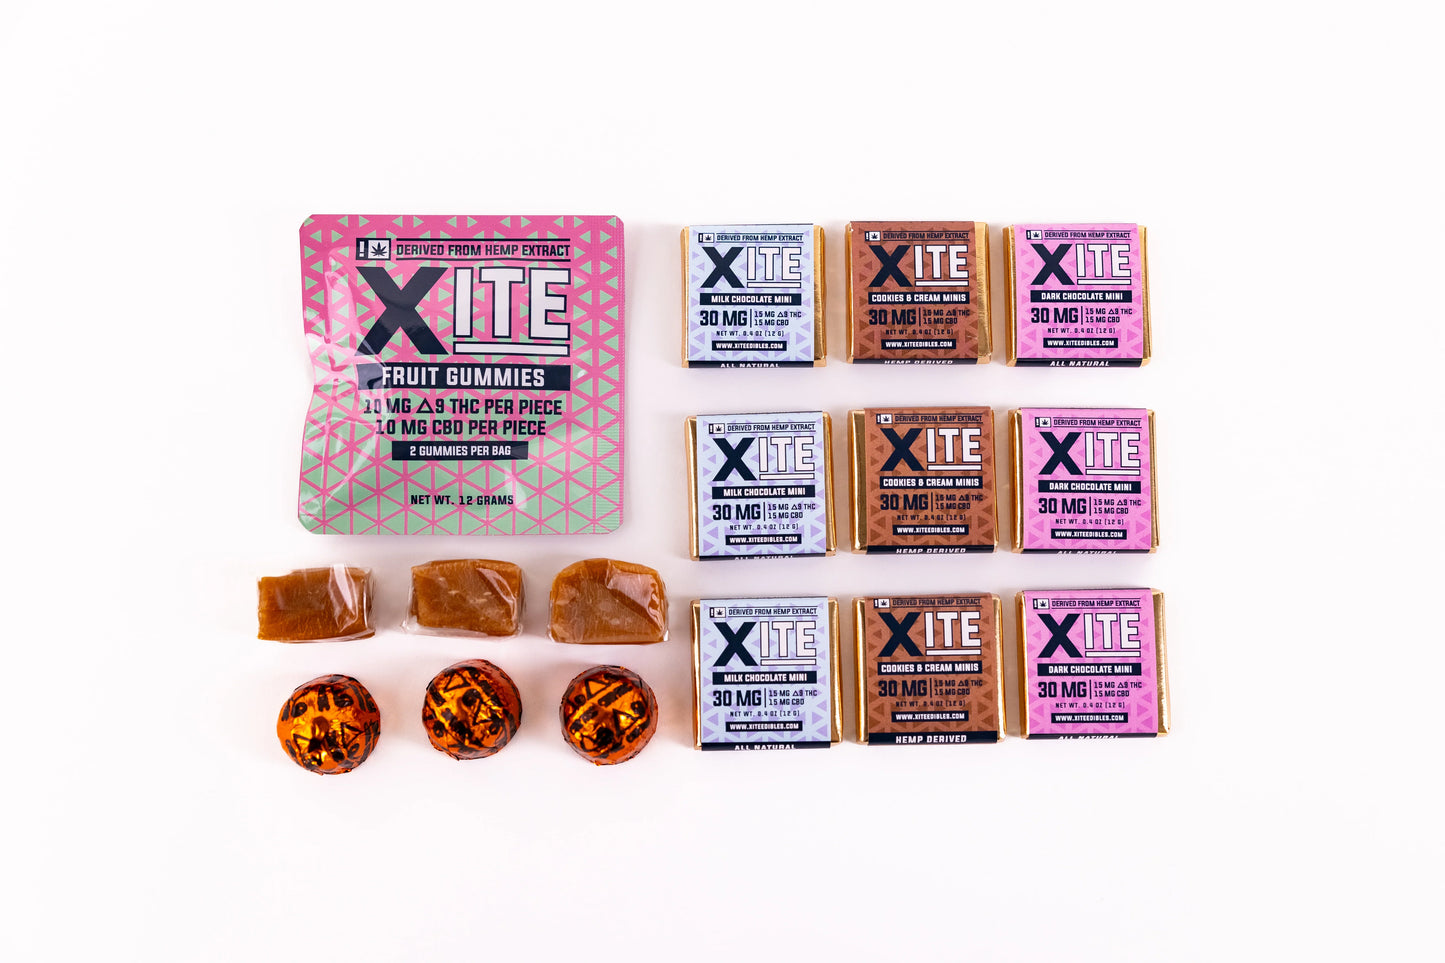 Xite Edibles' D9 Assorted Sample pack